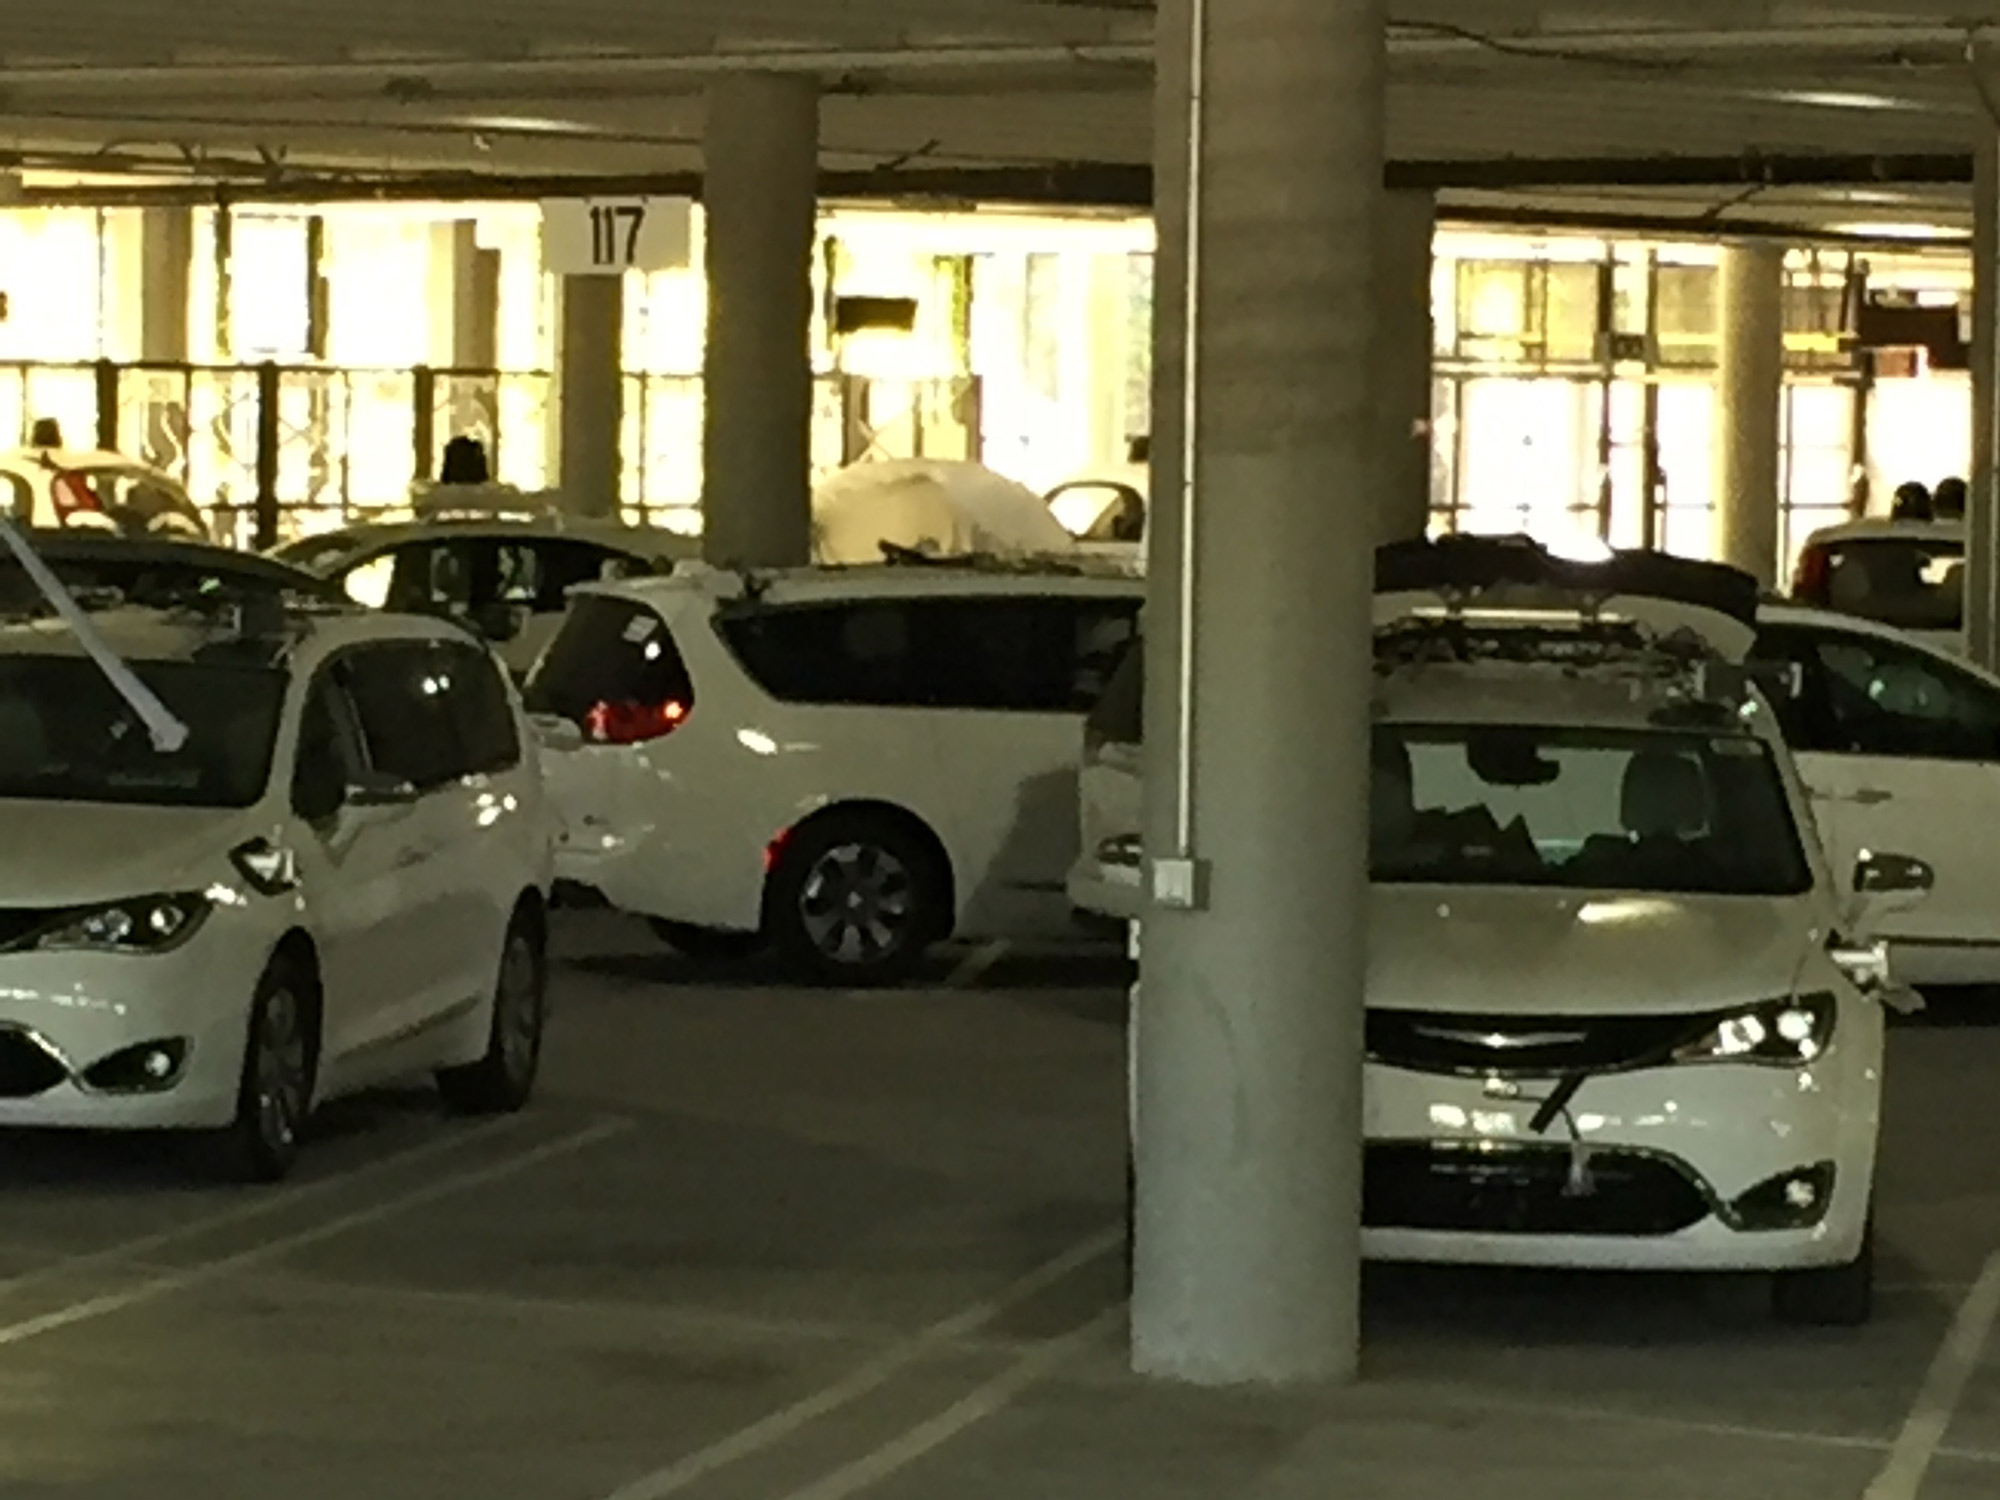 Google Chrysler Pacifica self-driving-cars spotted